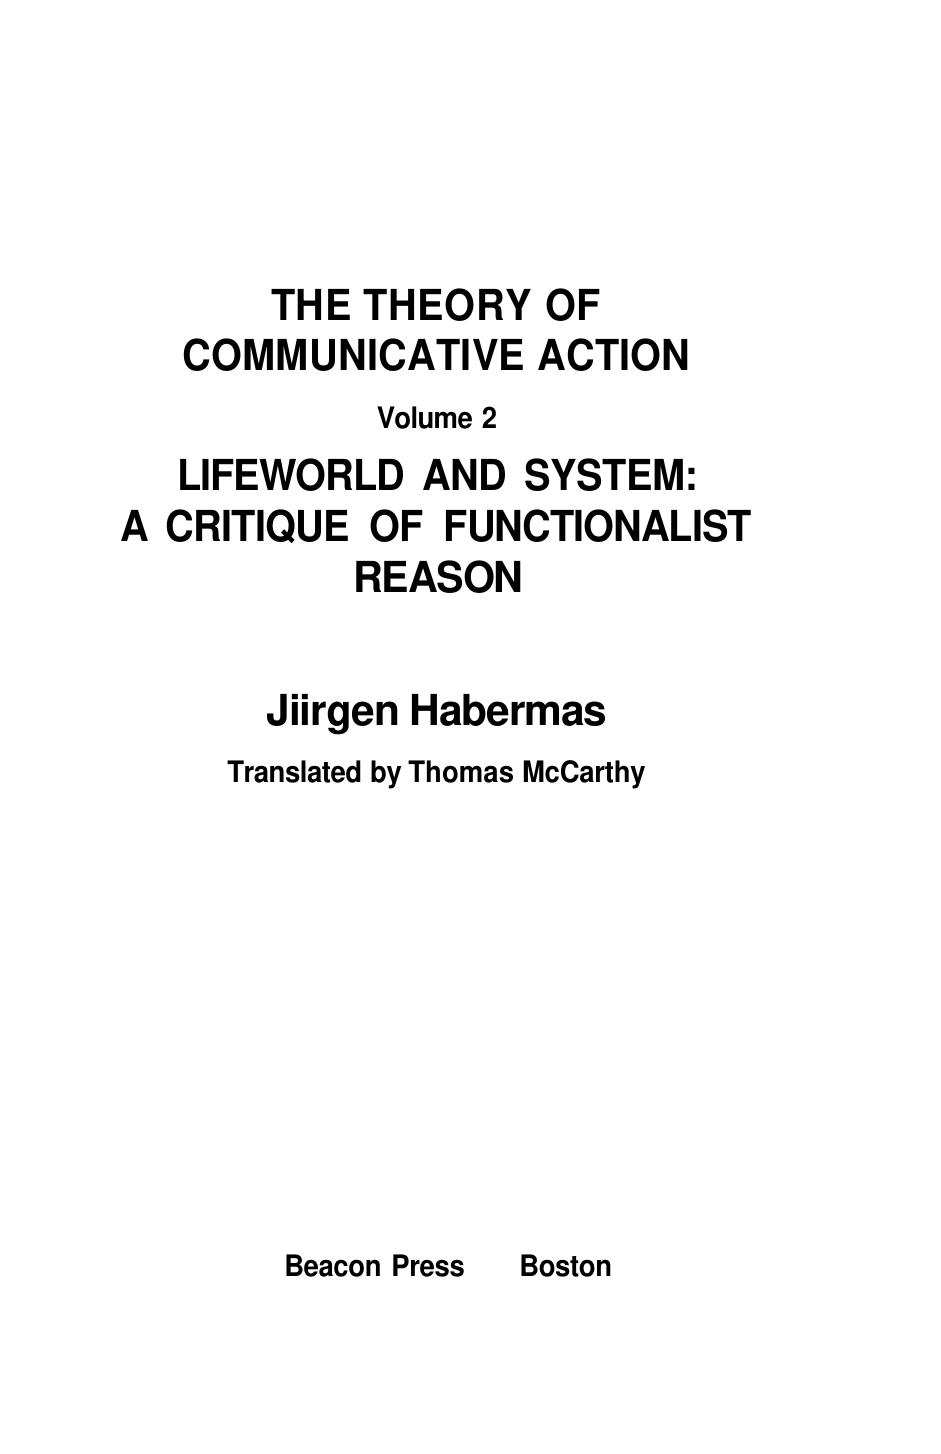 The Theory of Communicative Action: Lifeworld and System : A Critique of Functionalist Reason (Volume 2)